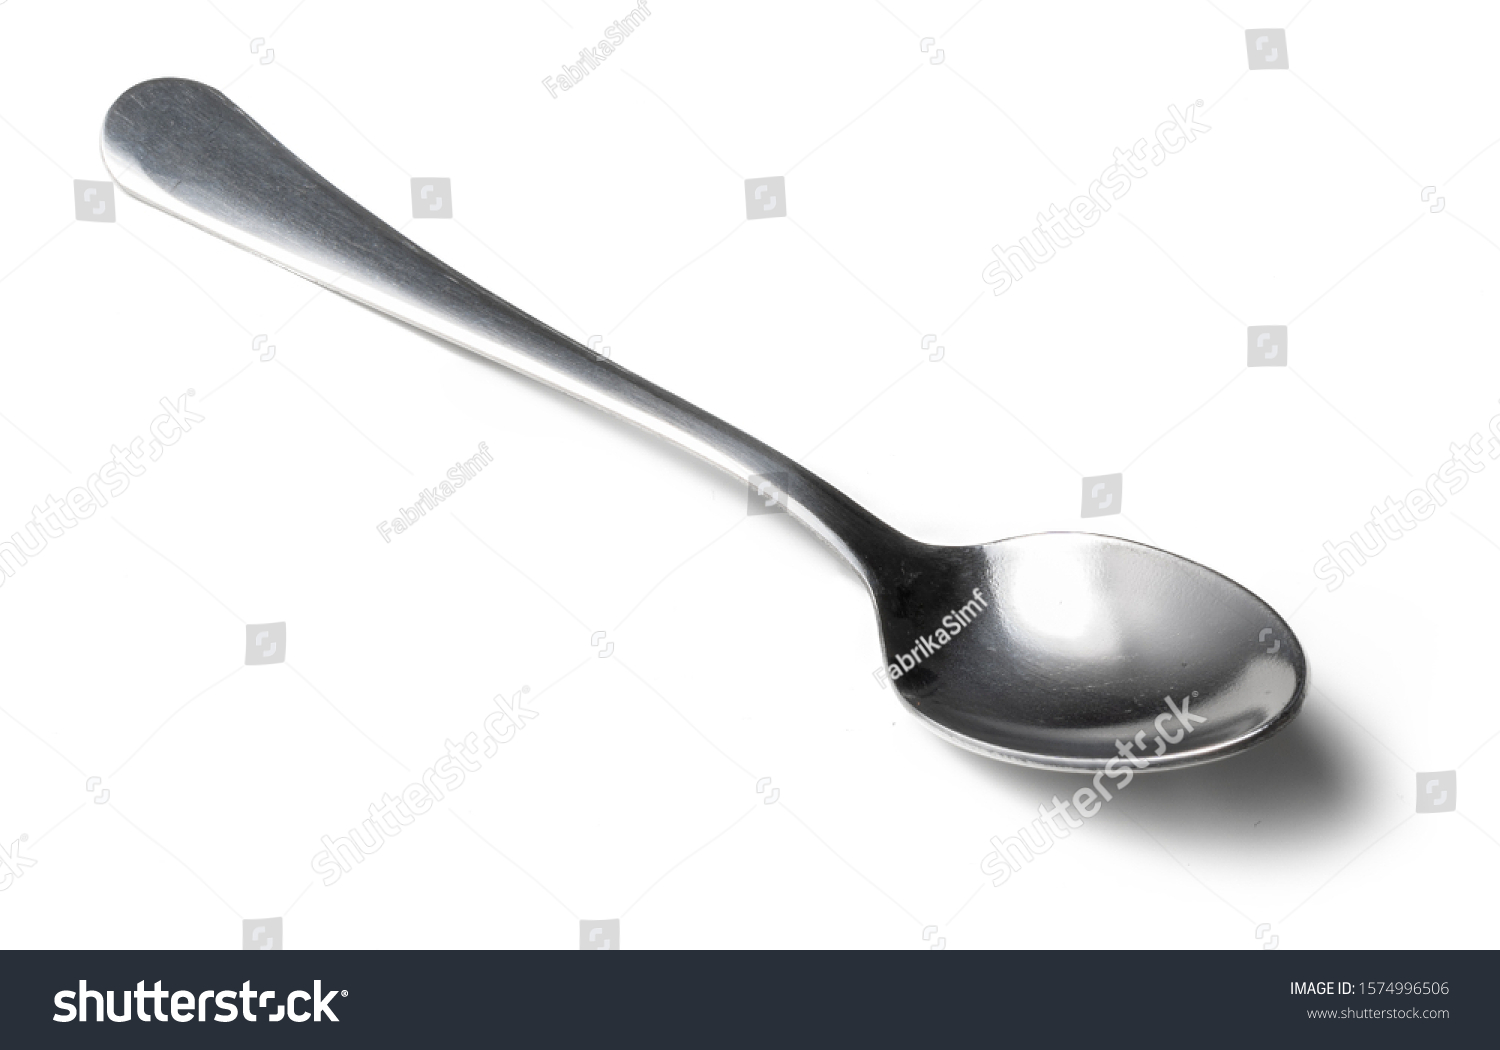 Stainless cutlery spoon isolated on white background #1574996506